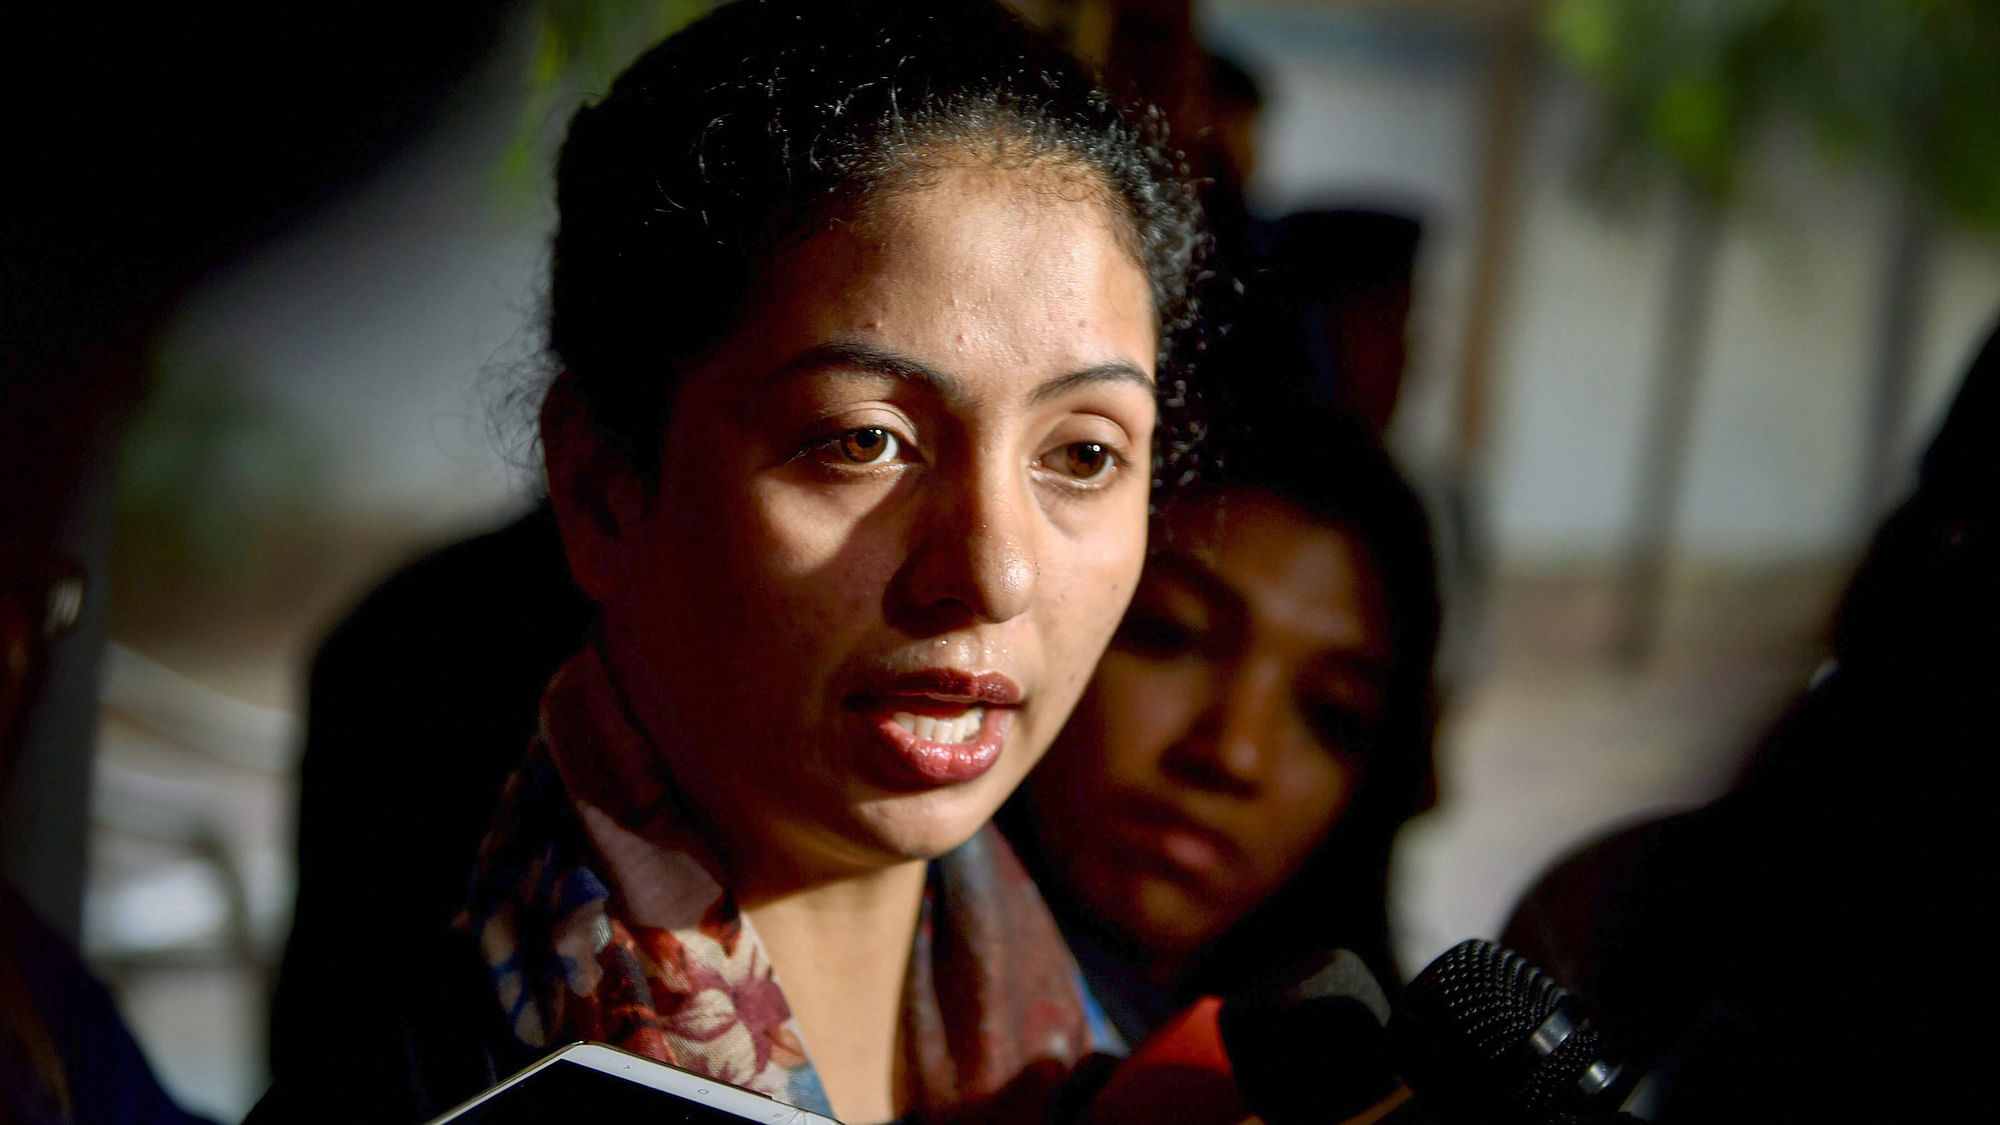 Cricketer Mohammed Shami’s wife Hasin Jahan, who has accused her husband of torture and having extra-marital affairs, talks to the media in Kolkata on Friday.&nbsp;